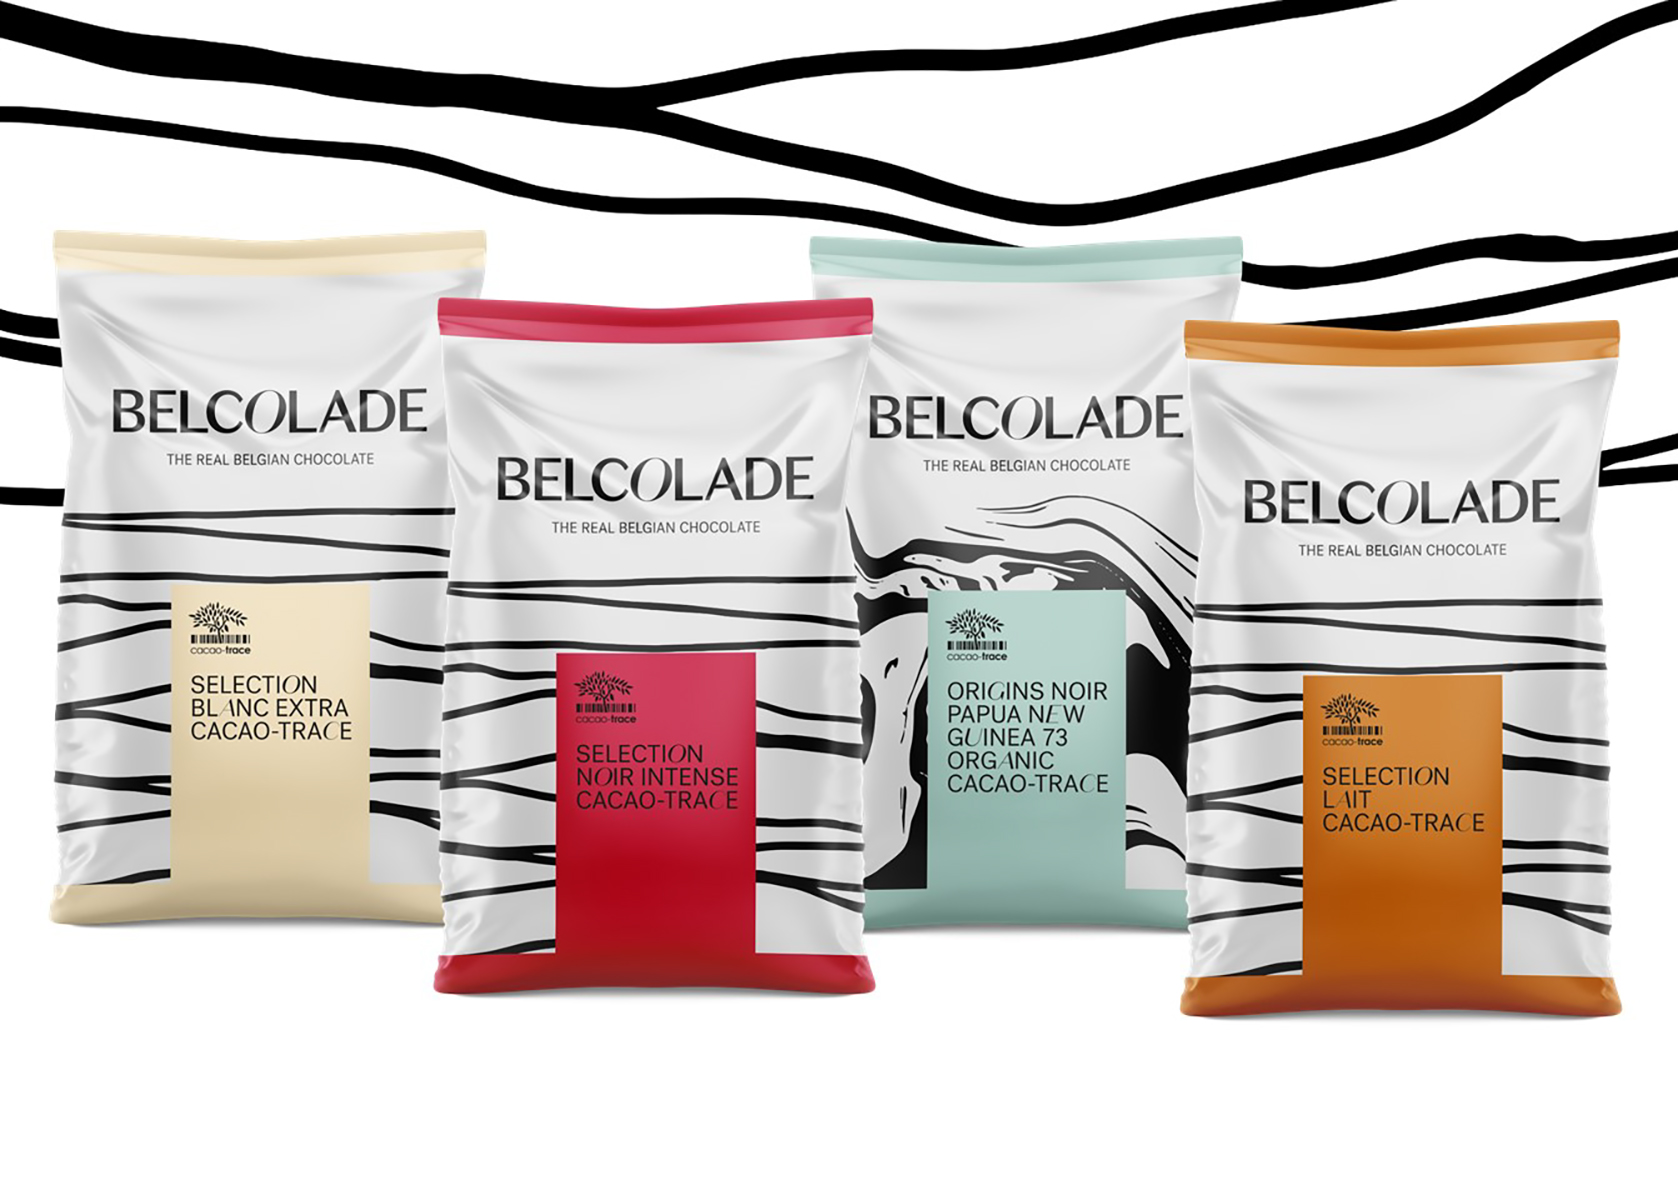 Belcolade keeps moving the planet forward with new packaging